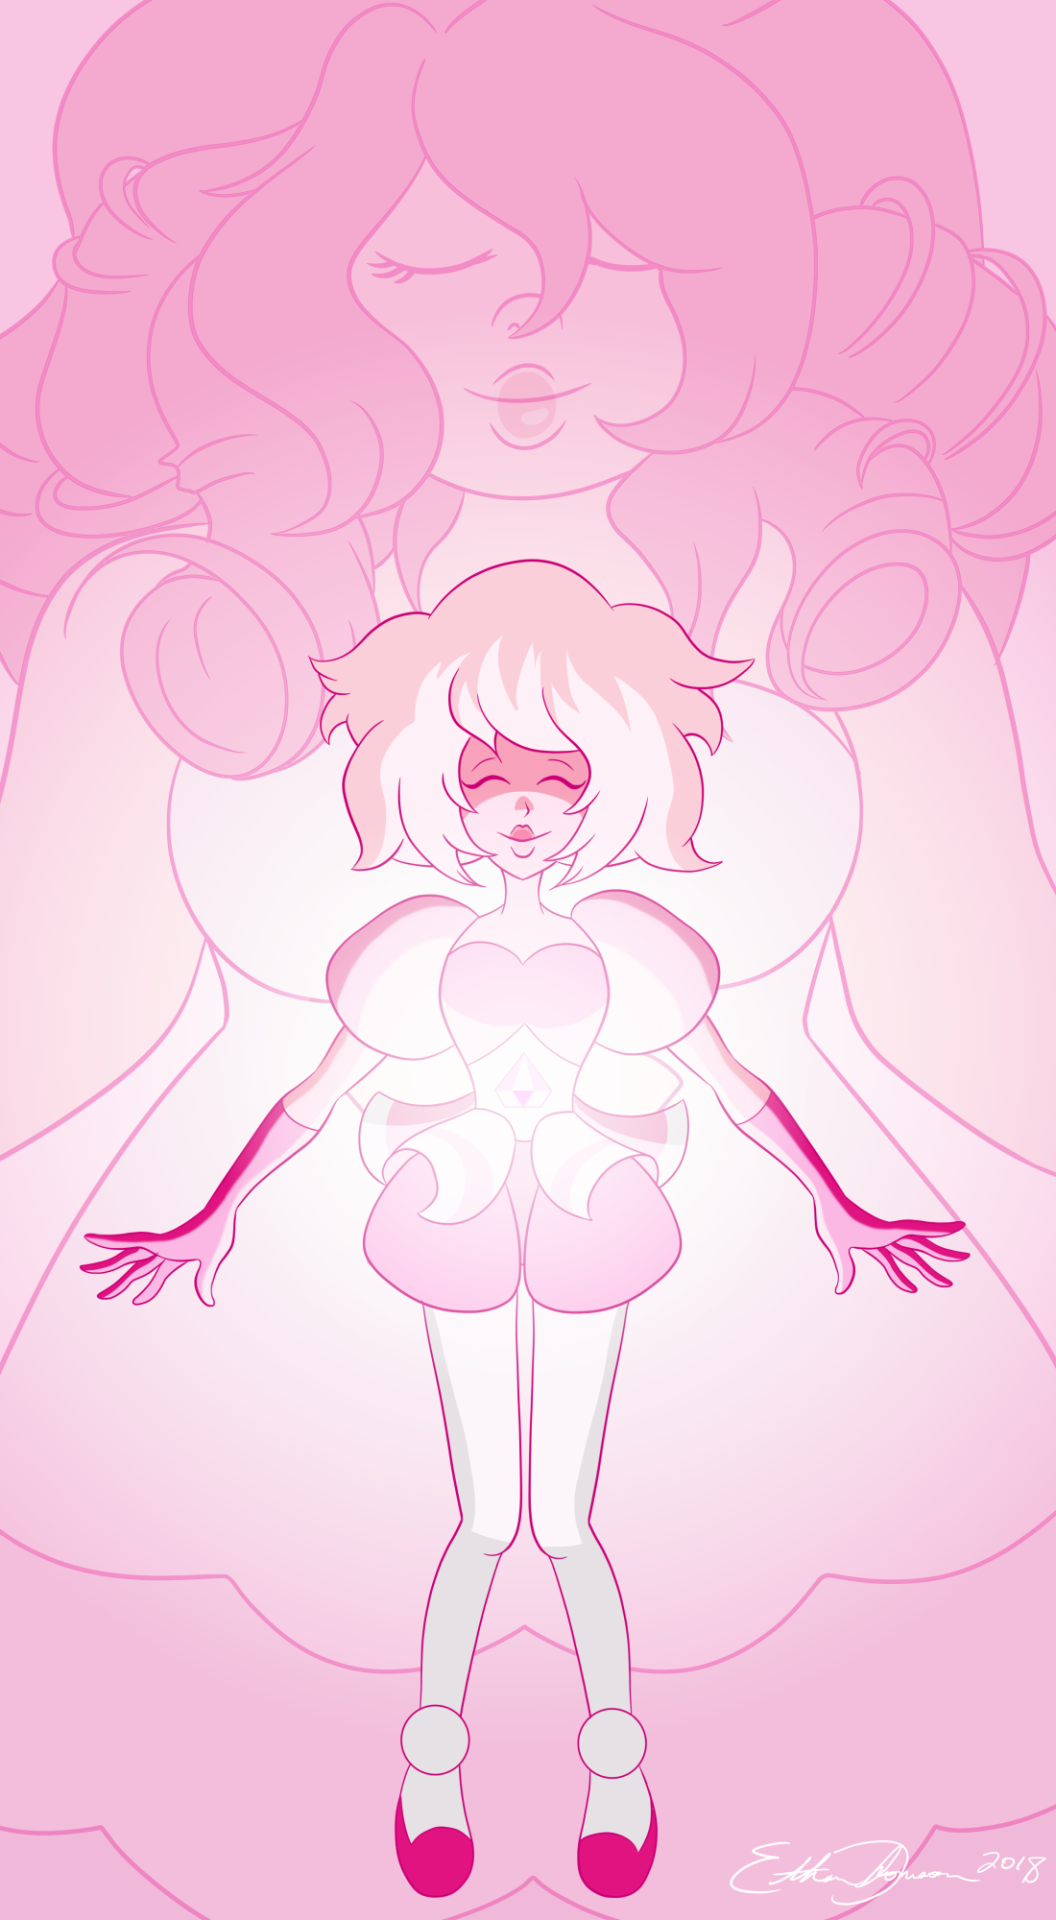 Little concept I thought up last night. Also, why is Rose Quartz’ hair so fun to draw?